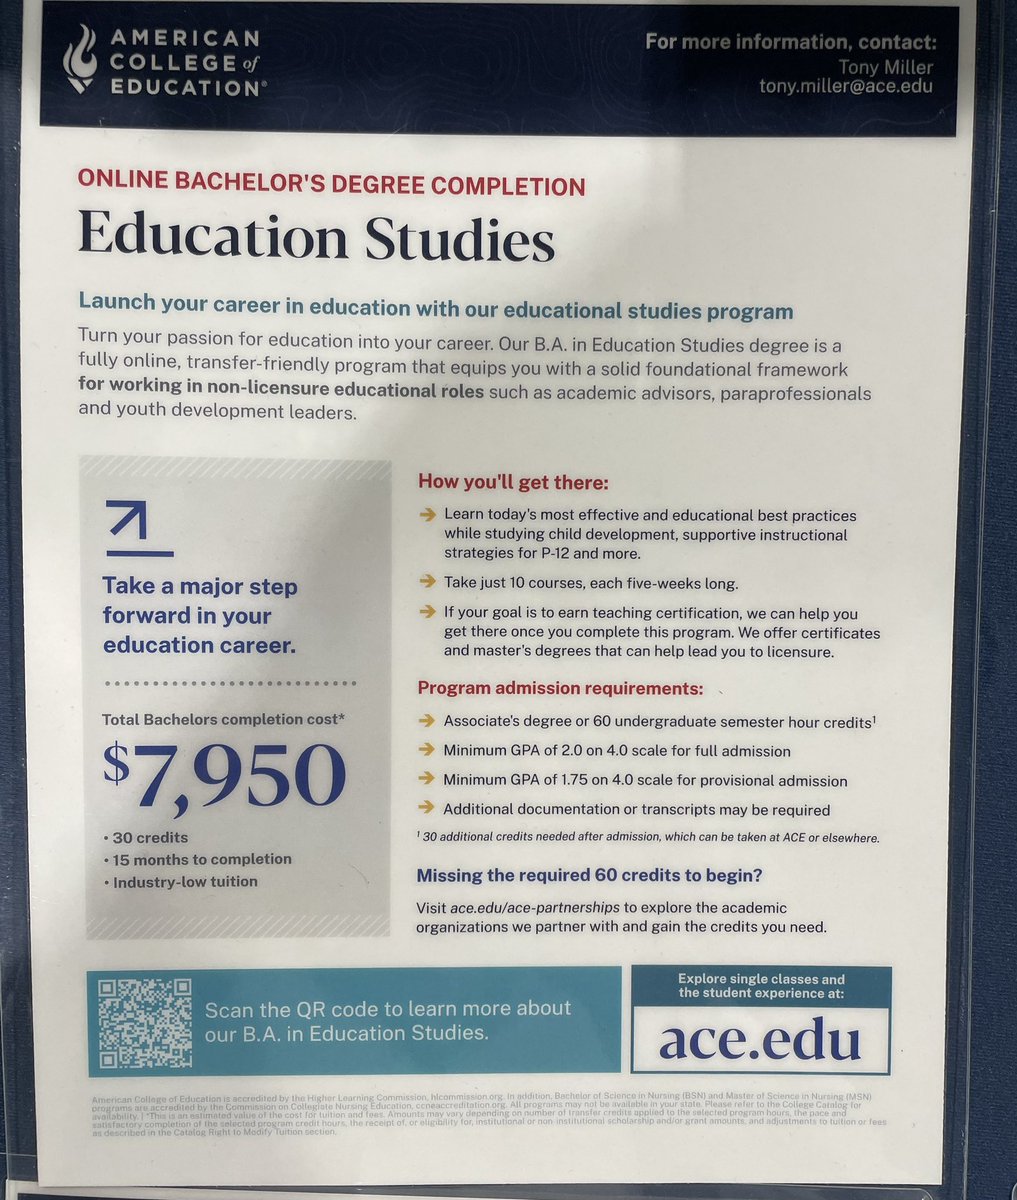 Good Morning @ASCD! We had so many educators stop by and ask about education solutions for paraprofessionals! We have a special program with those folks in mind! Stop by the @ACEedu booth (409) and find out more! #ASCD2023 #ASCDAnnualConference #ASCD23 #paraprofessionals